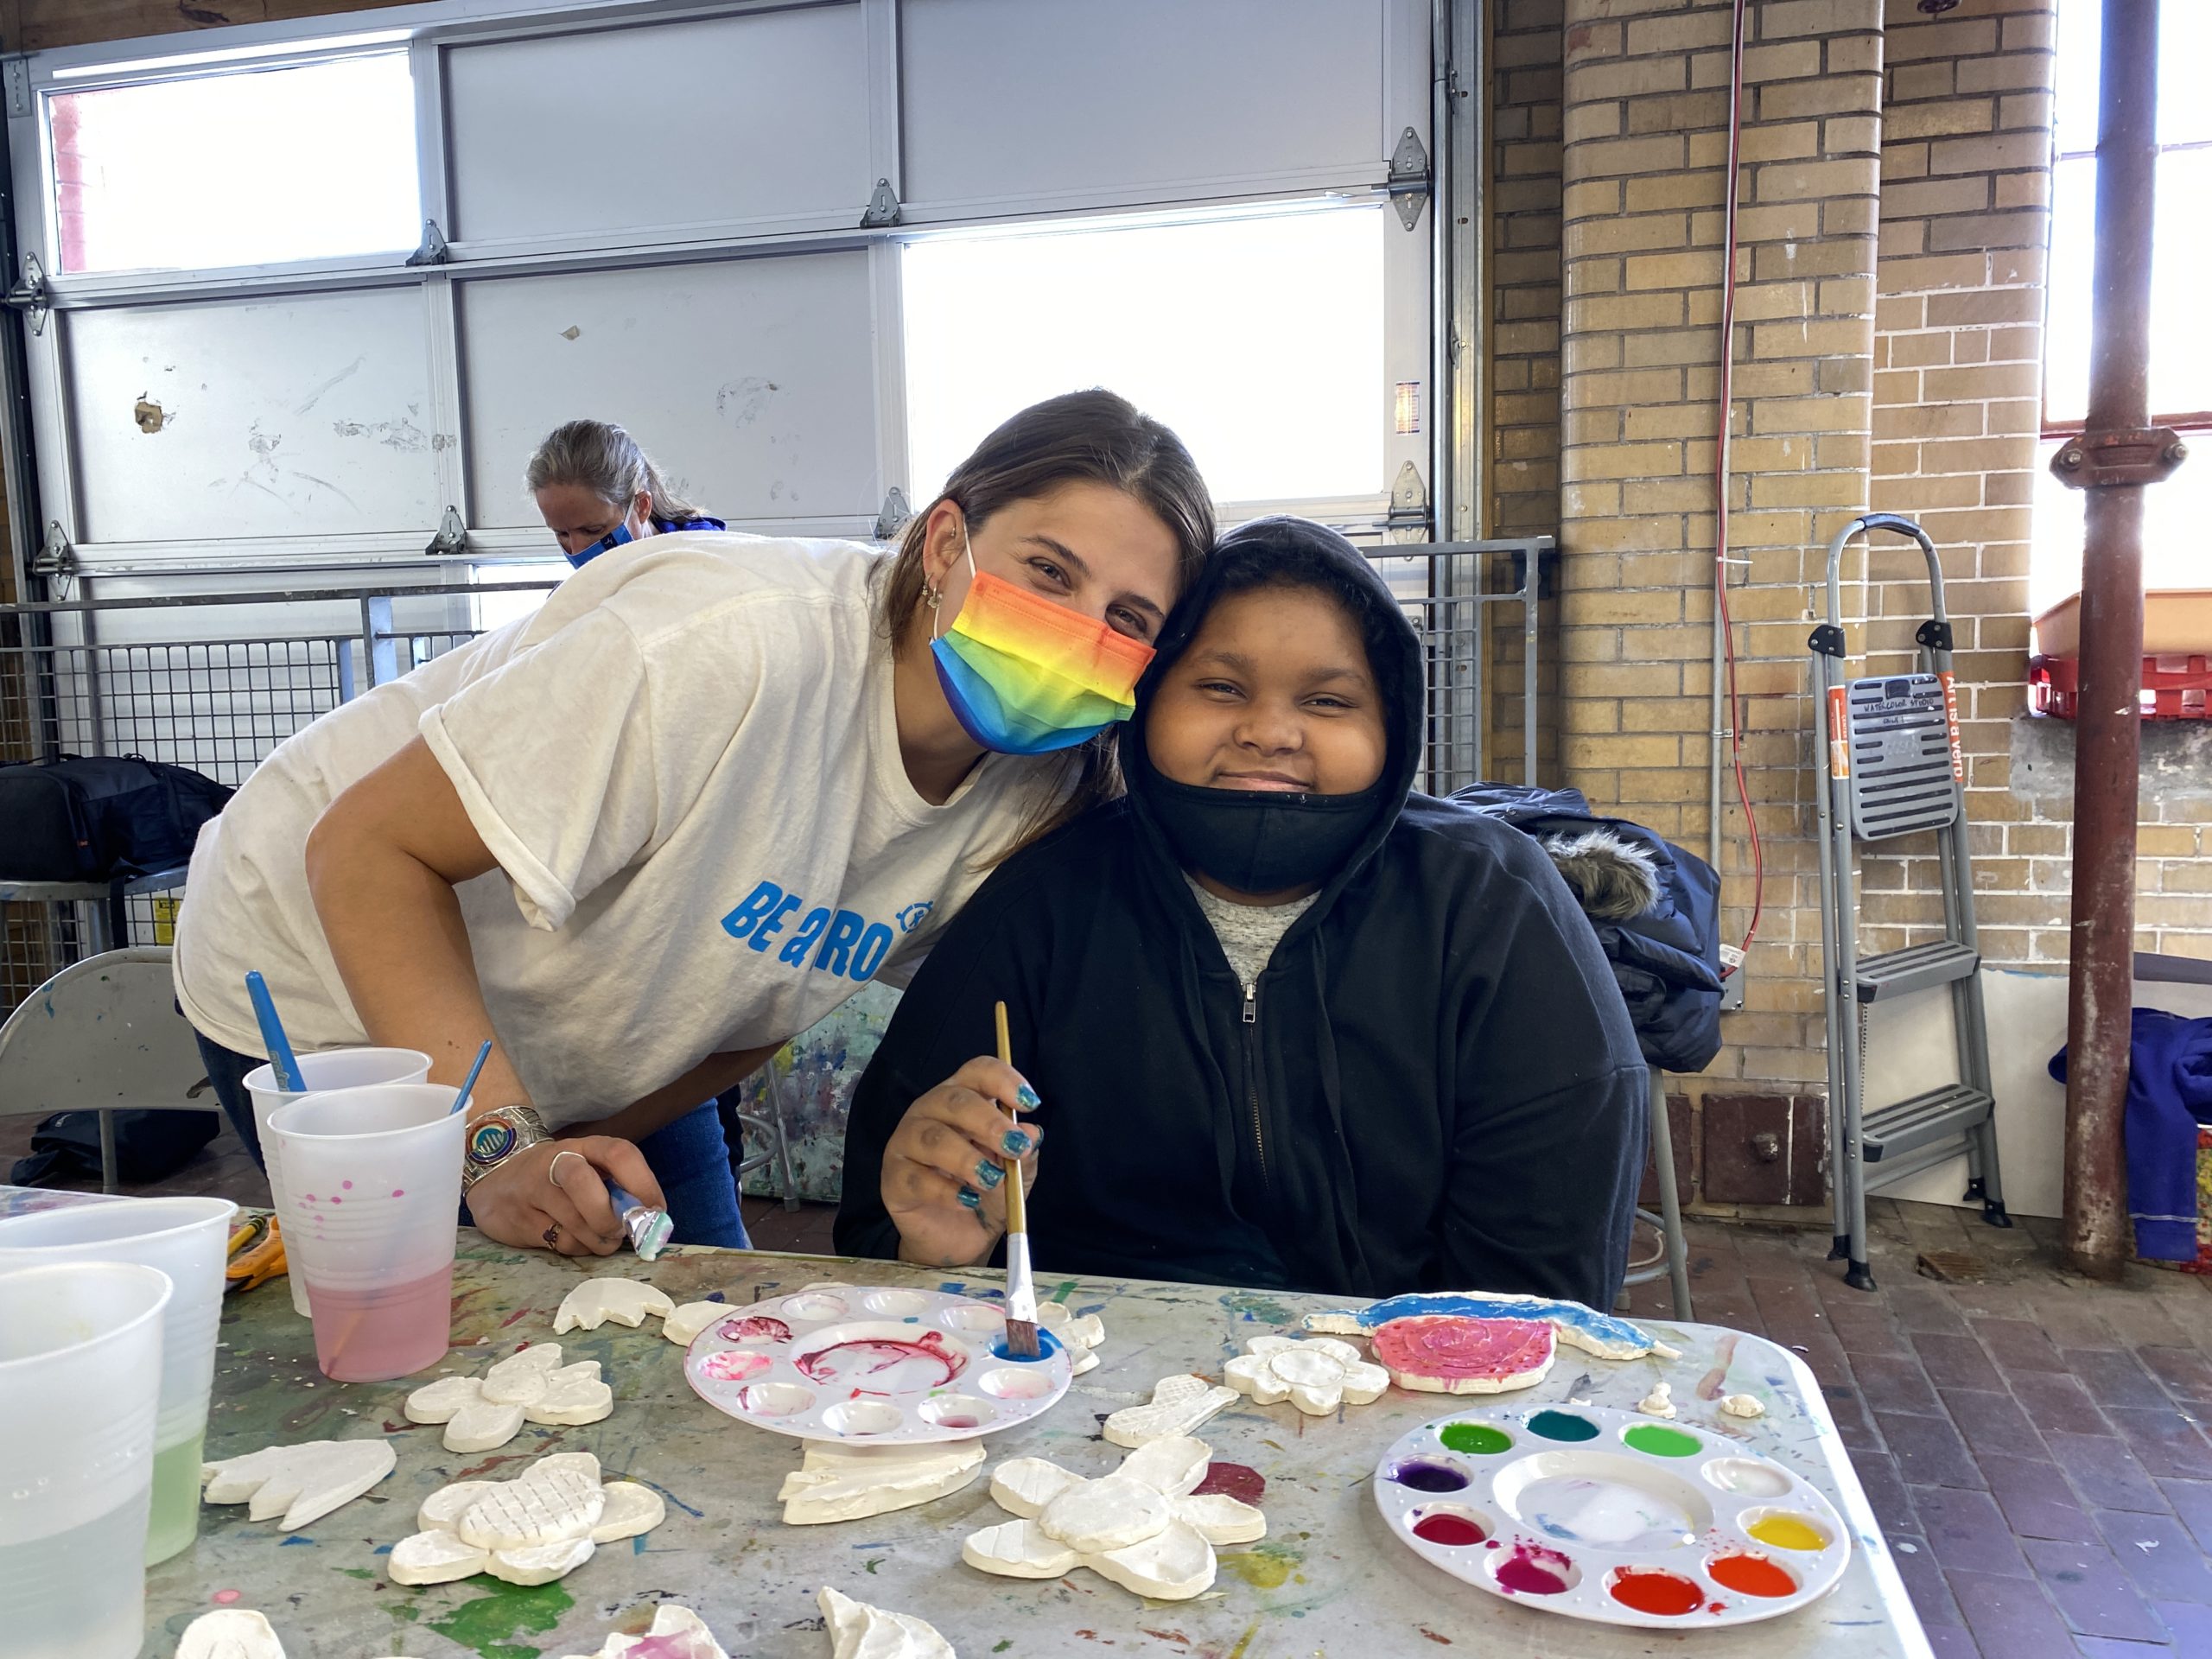 A woman and a teen are in an art studio working on a painting together